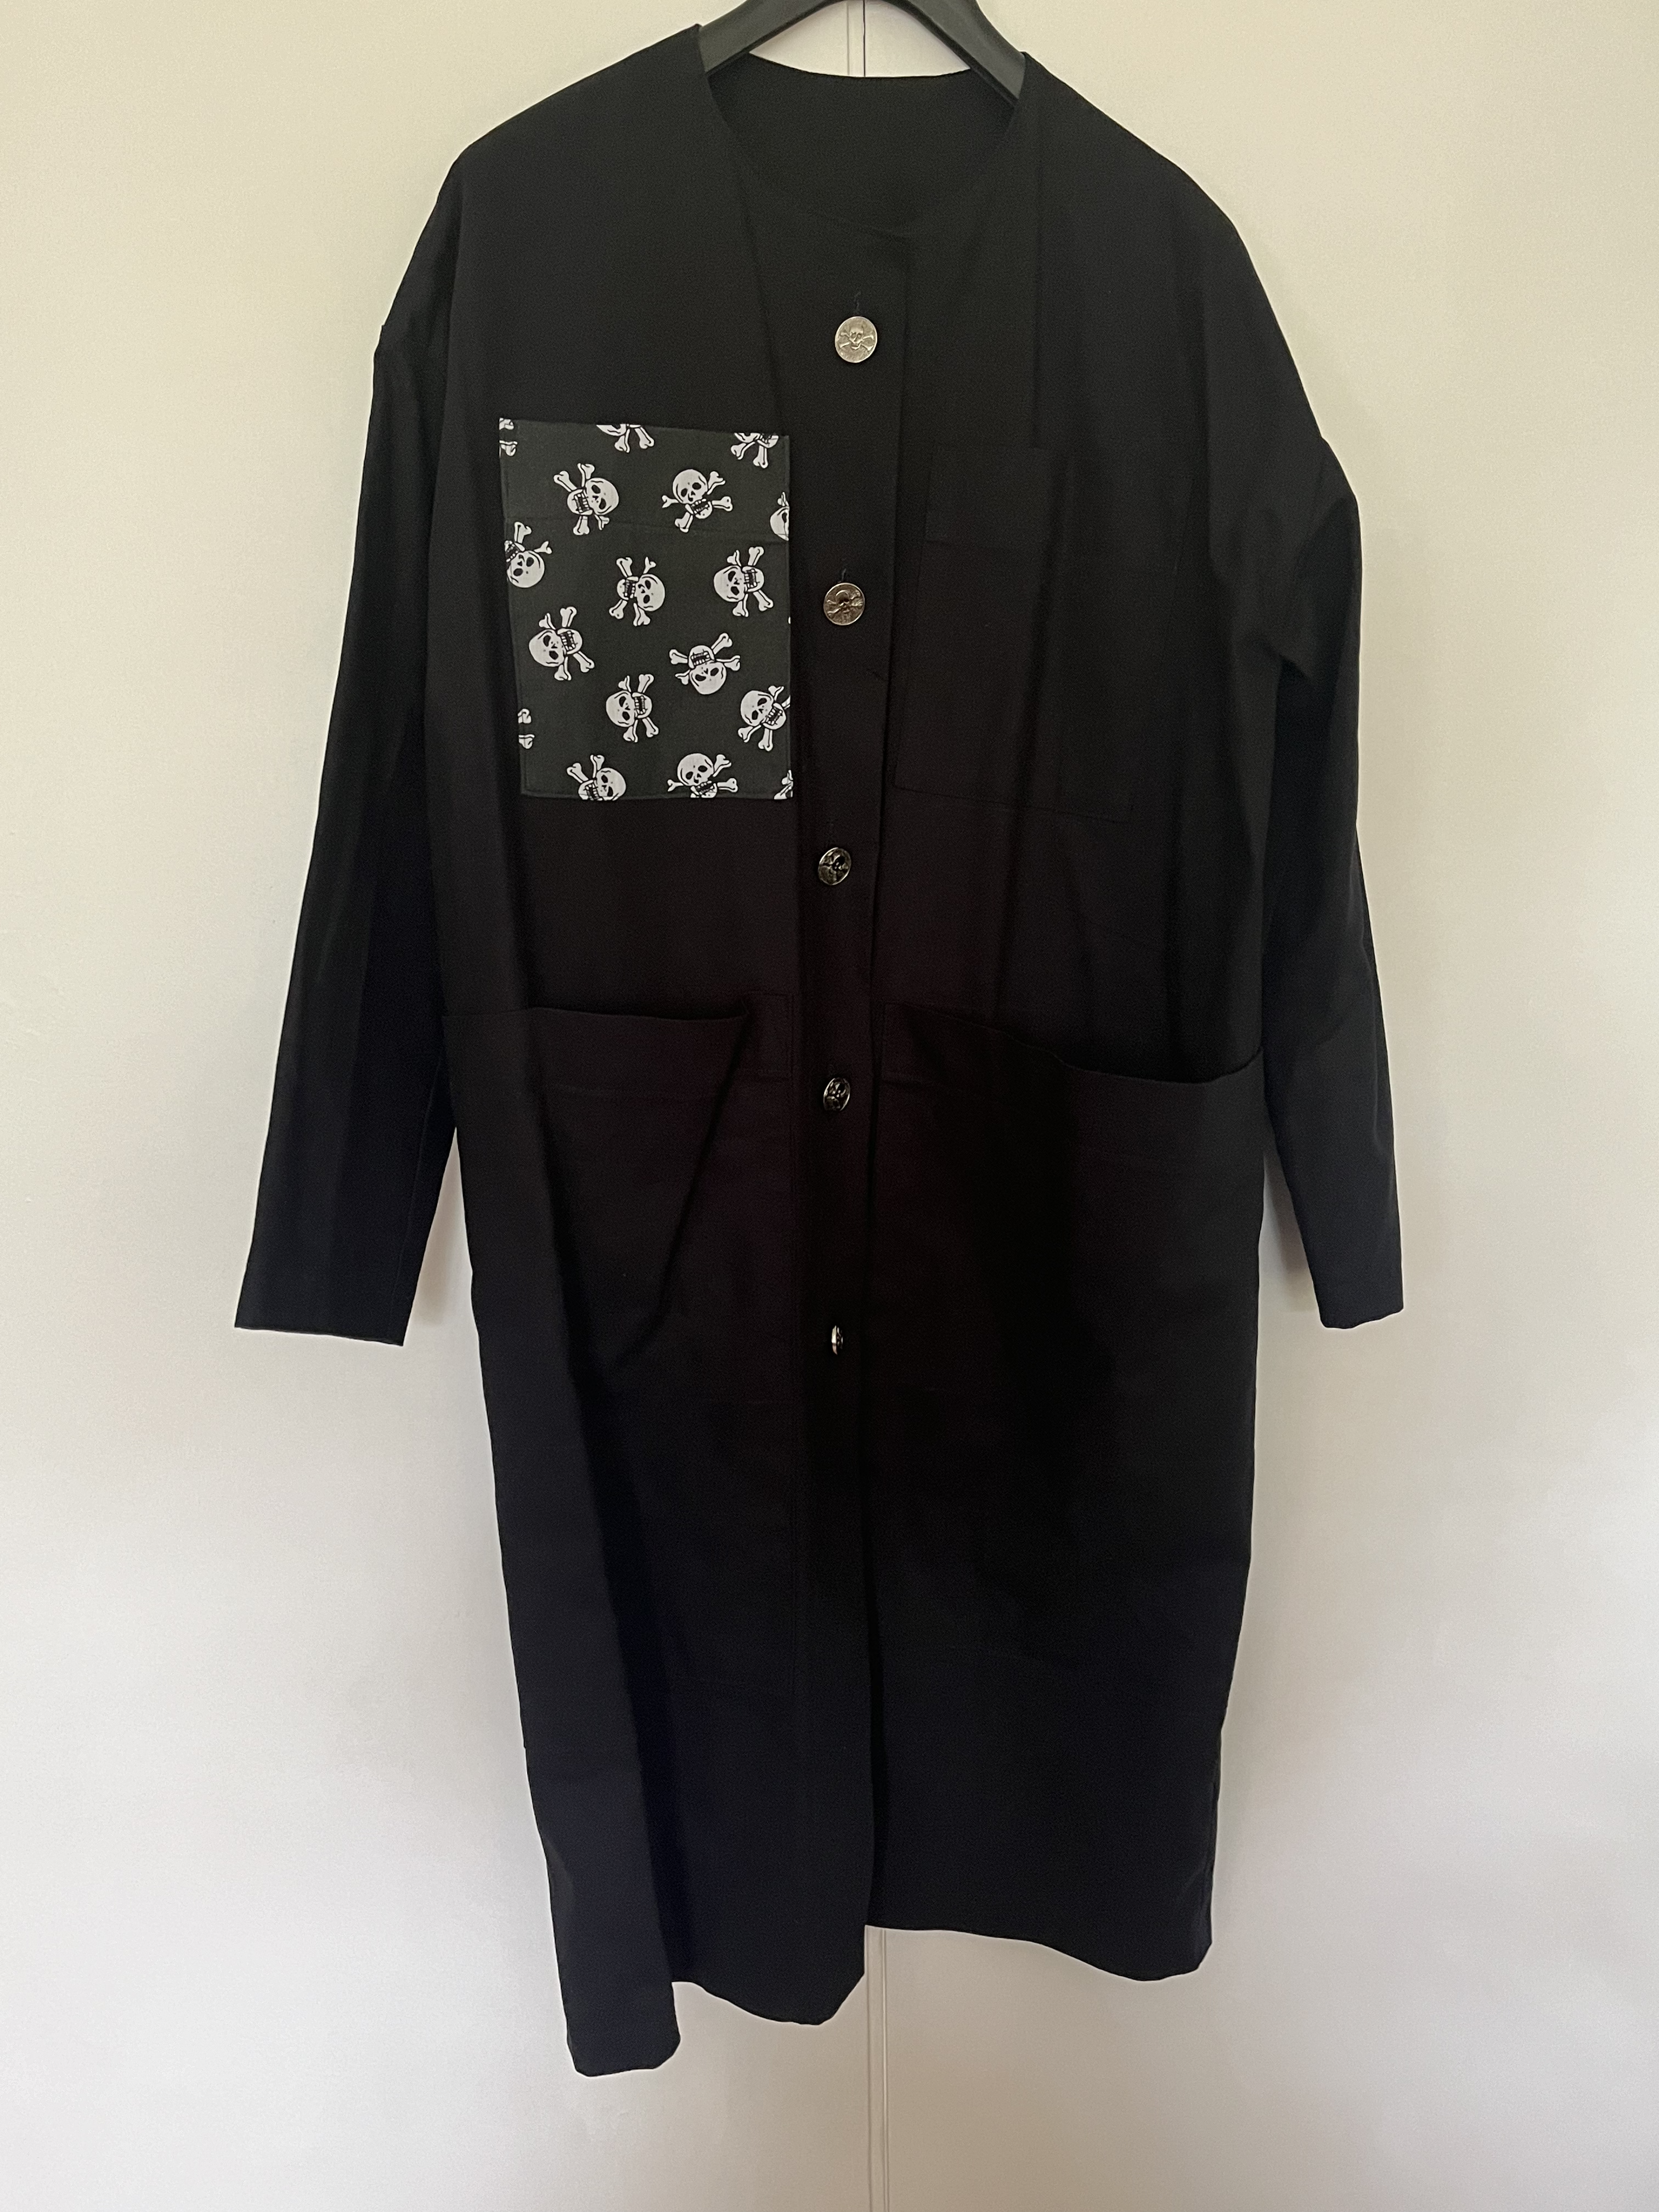 Black contrast lab coat with skull patch